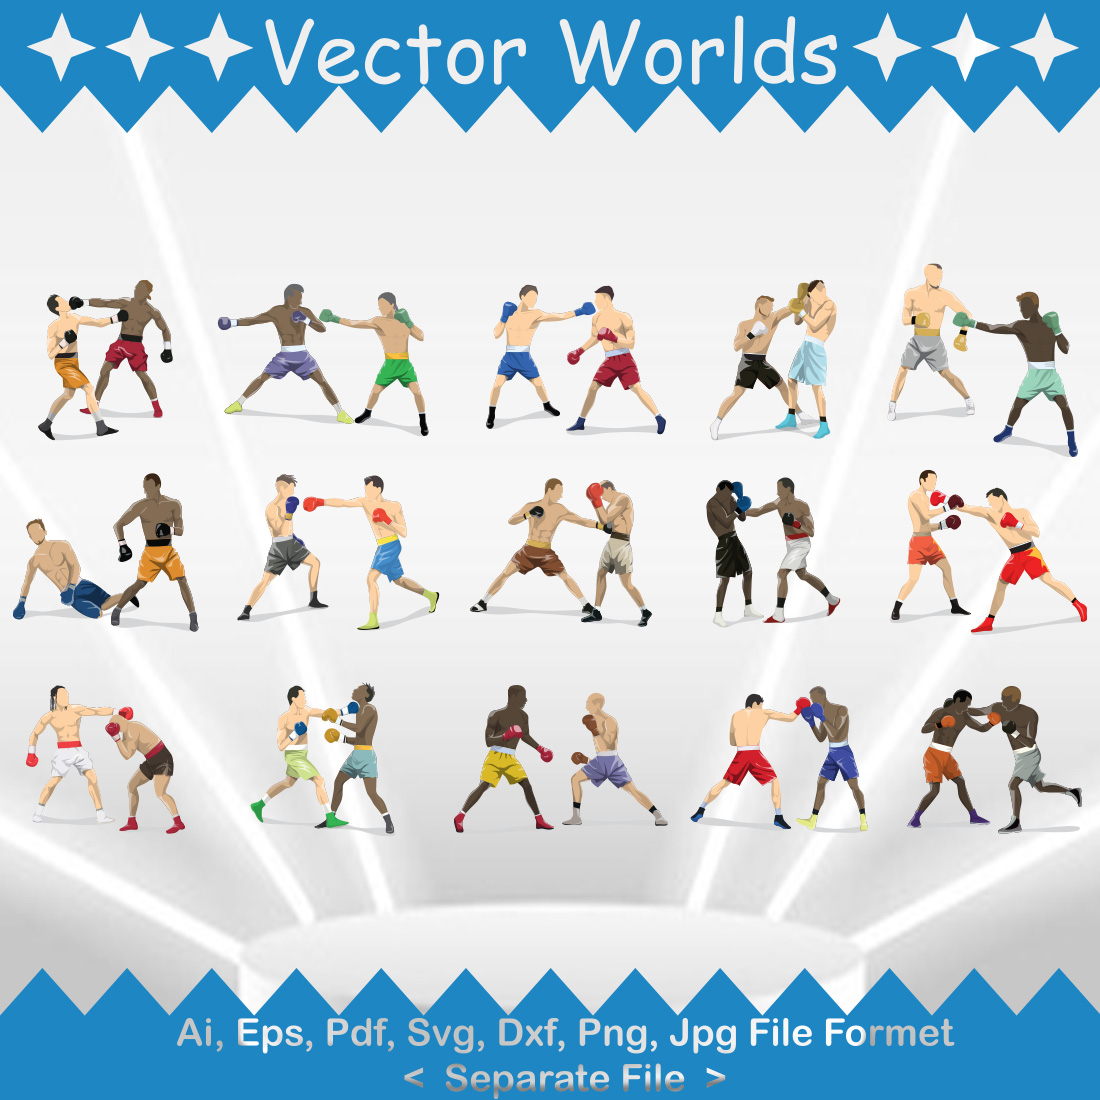 WWE SVG Vector Design cover image.